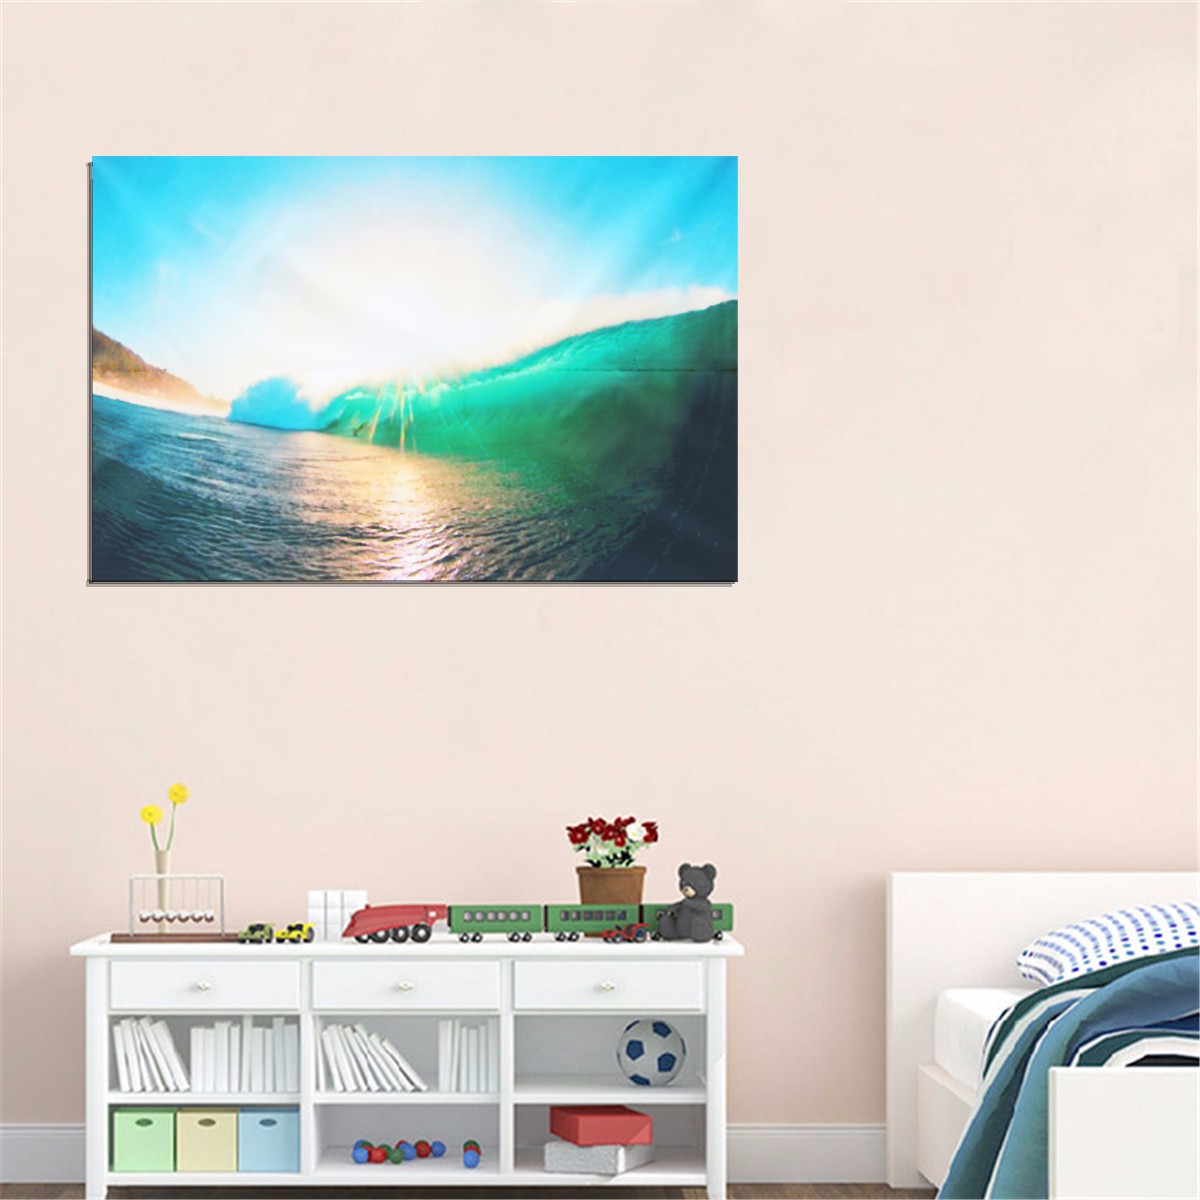 60x90CM-Sunshine-and-Sea-Natural-Scenery-Art-Picture-Silk-Poster-Fabric-Print-Wall-Decor-1079142